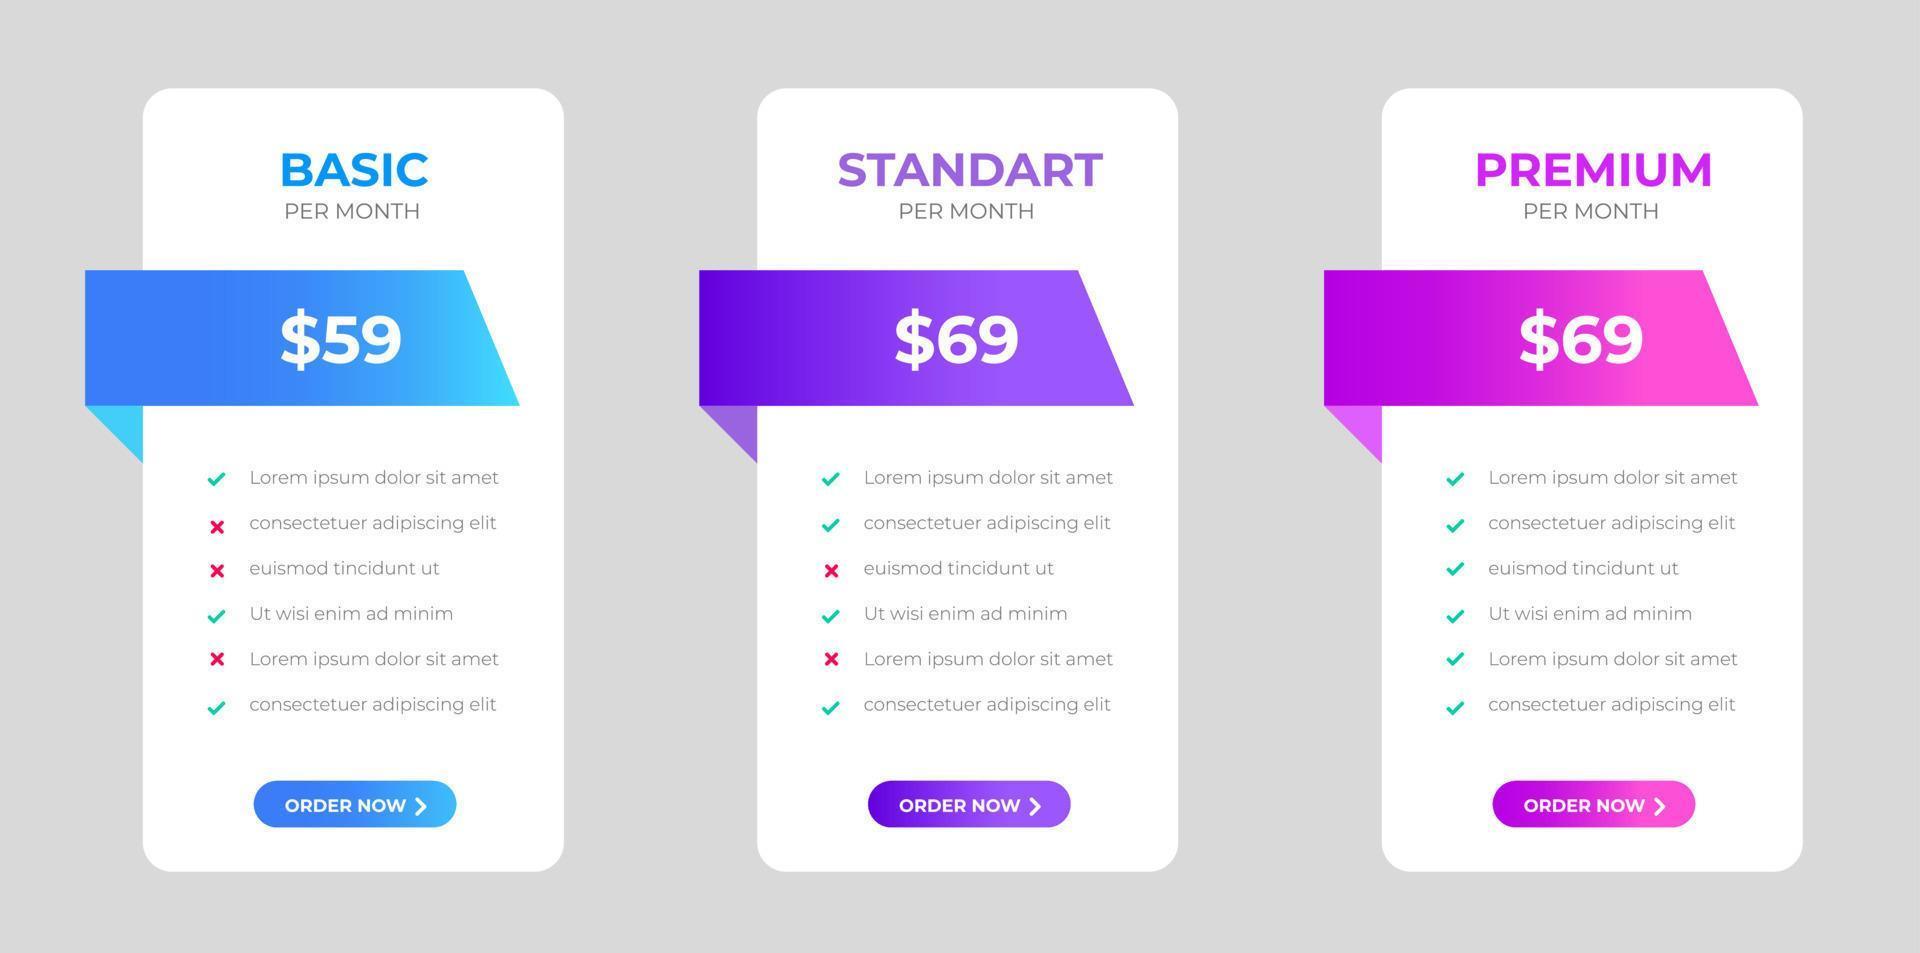 pricing plans table and pricing chart Price list  for web or app. Ui UX pricing design tables with tariffs, subscription features checklist and business plans. Product Comparison business web plans. vector